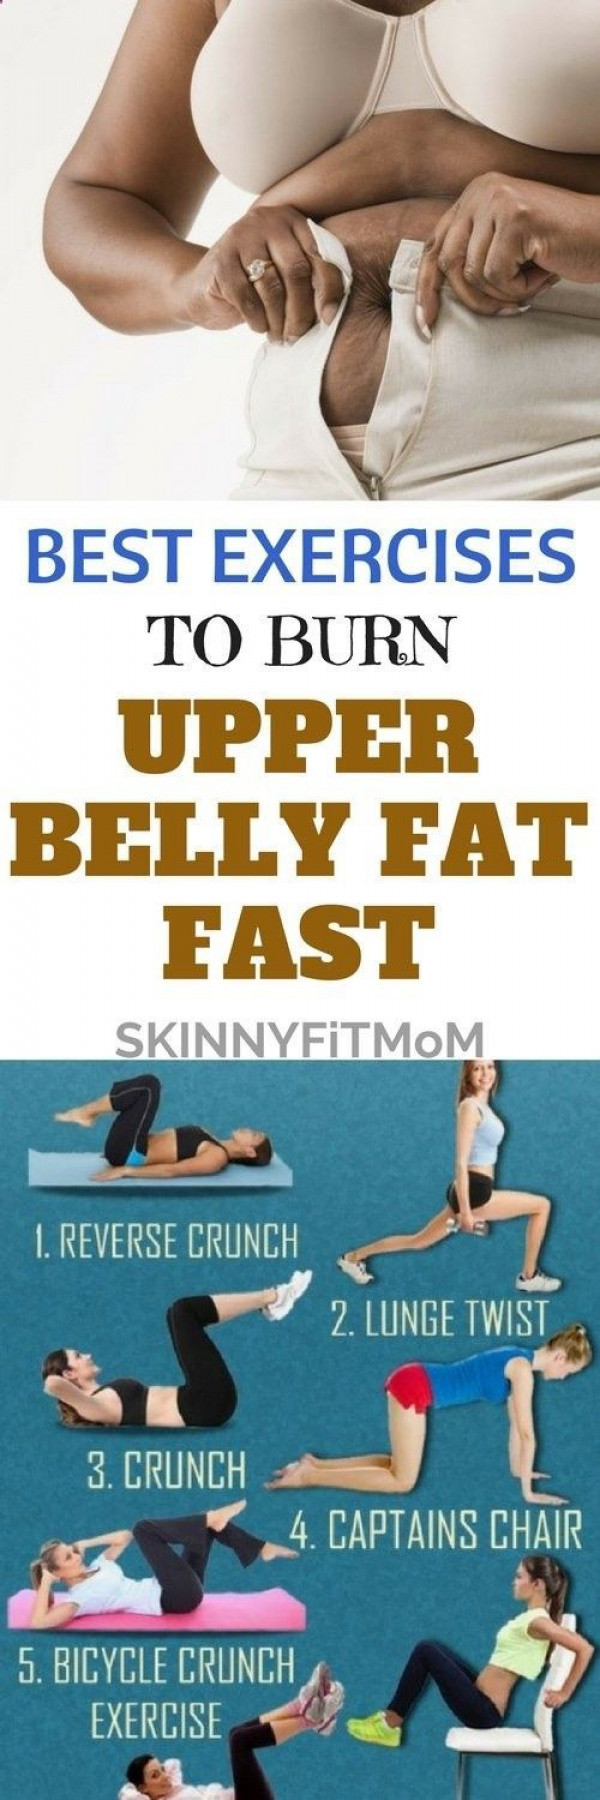 Burn Belly Fat Fast
 Best Exercises To Burn Upper Belly Fat Fast – Simple Ways